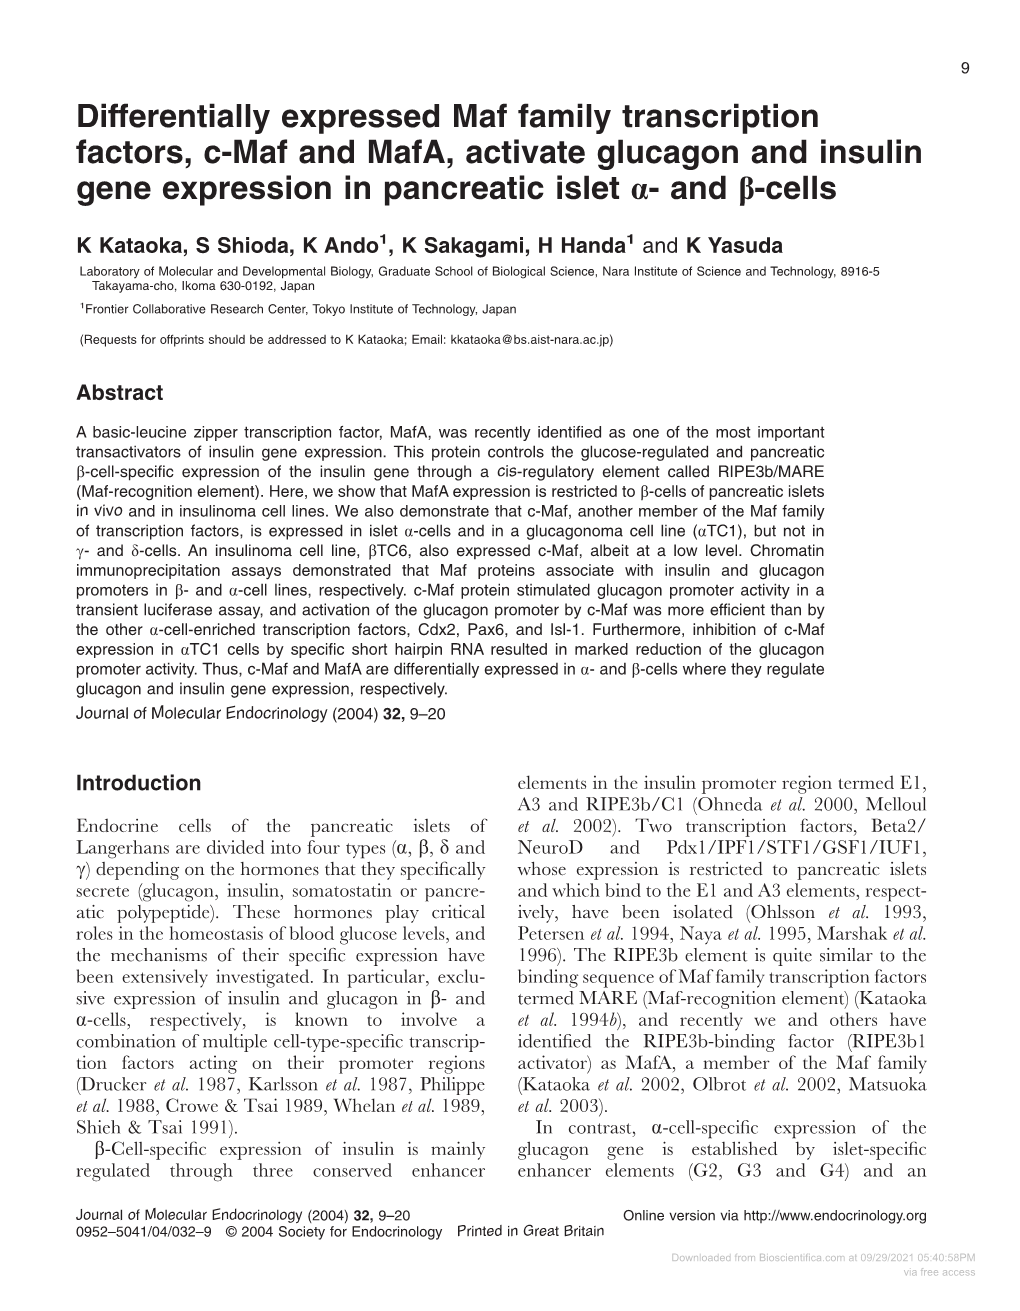 Differentially Expressed Maf Family Transcription Factors, C-Maf and Mafa, Activate Glucagon and Insulin Gene Expression in Pancreatic Islet - and -Cells